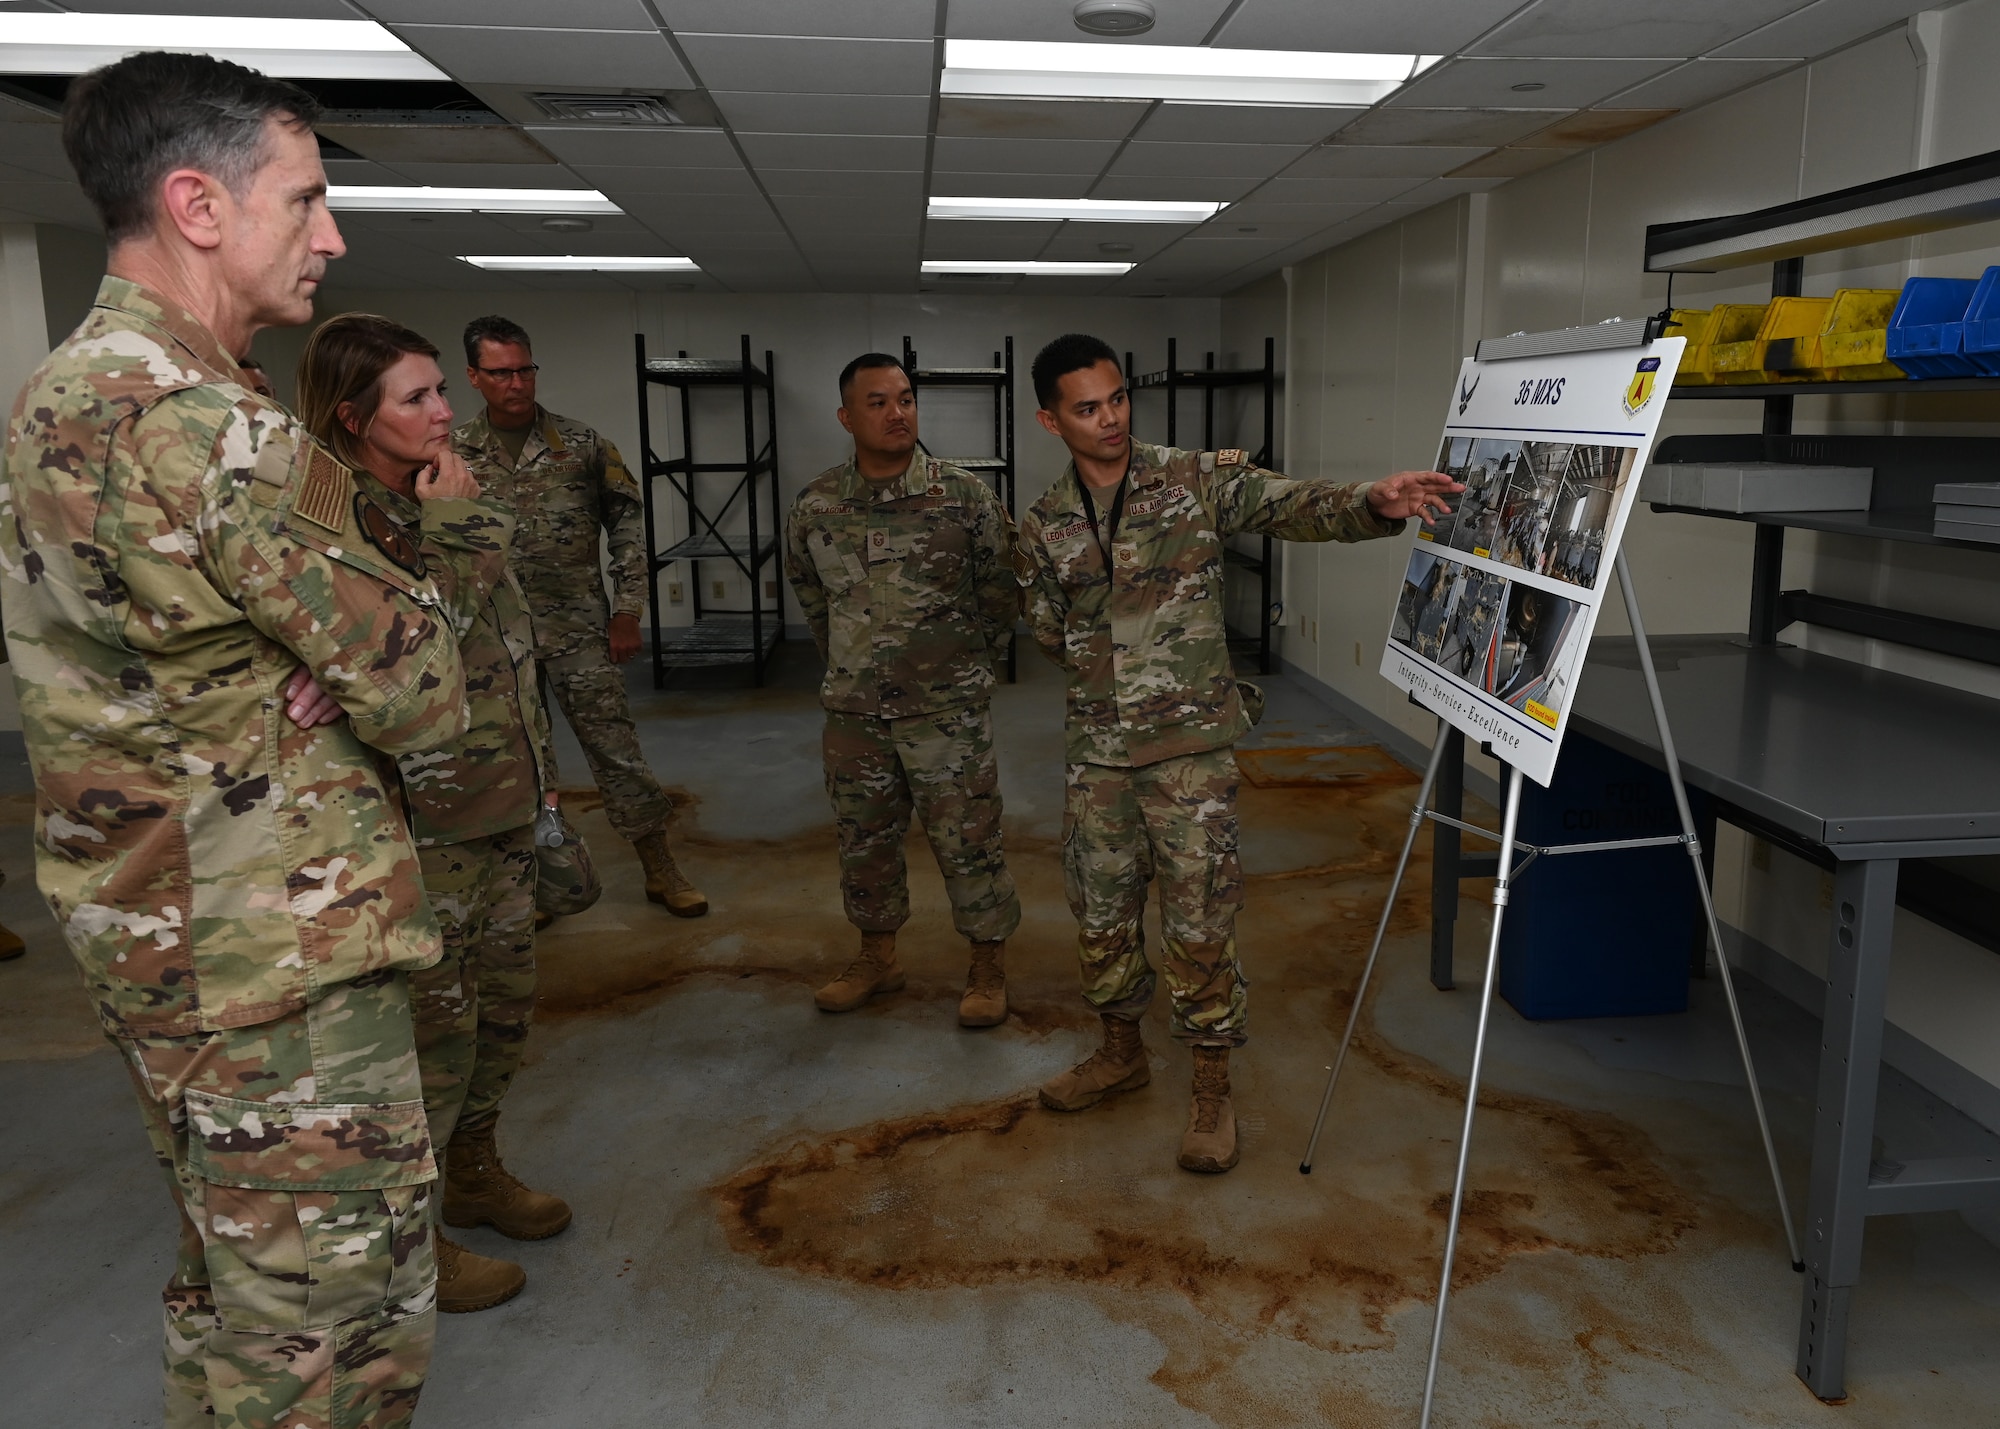 Four Airmen looks at a board that the fifth Airman points to. The board contains photos of the damage Typhoon Mawarr caused.